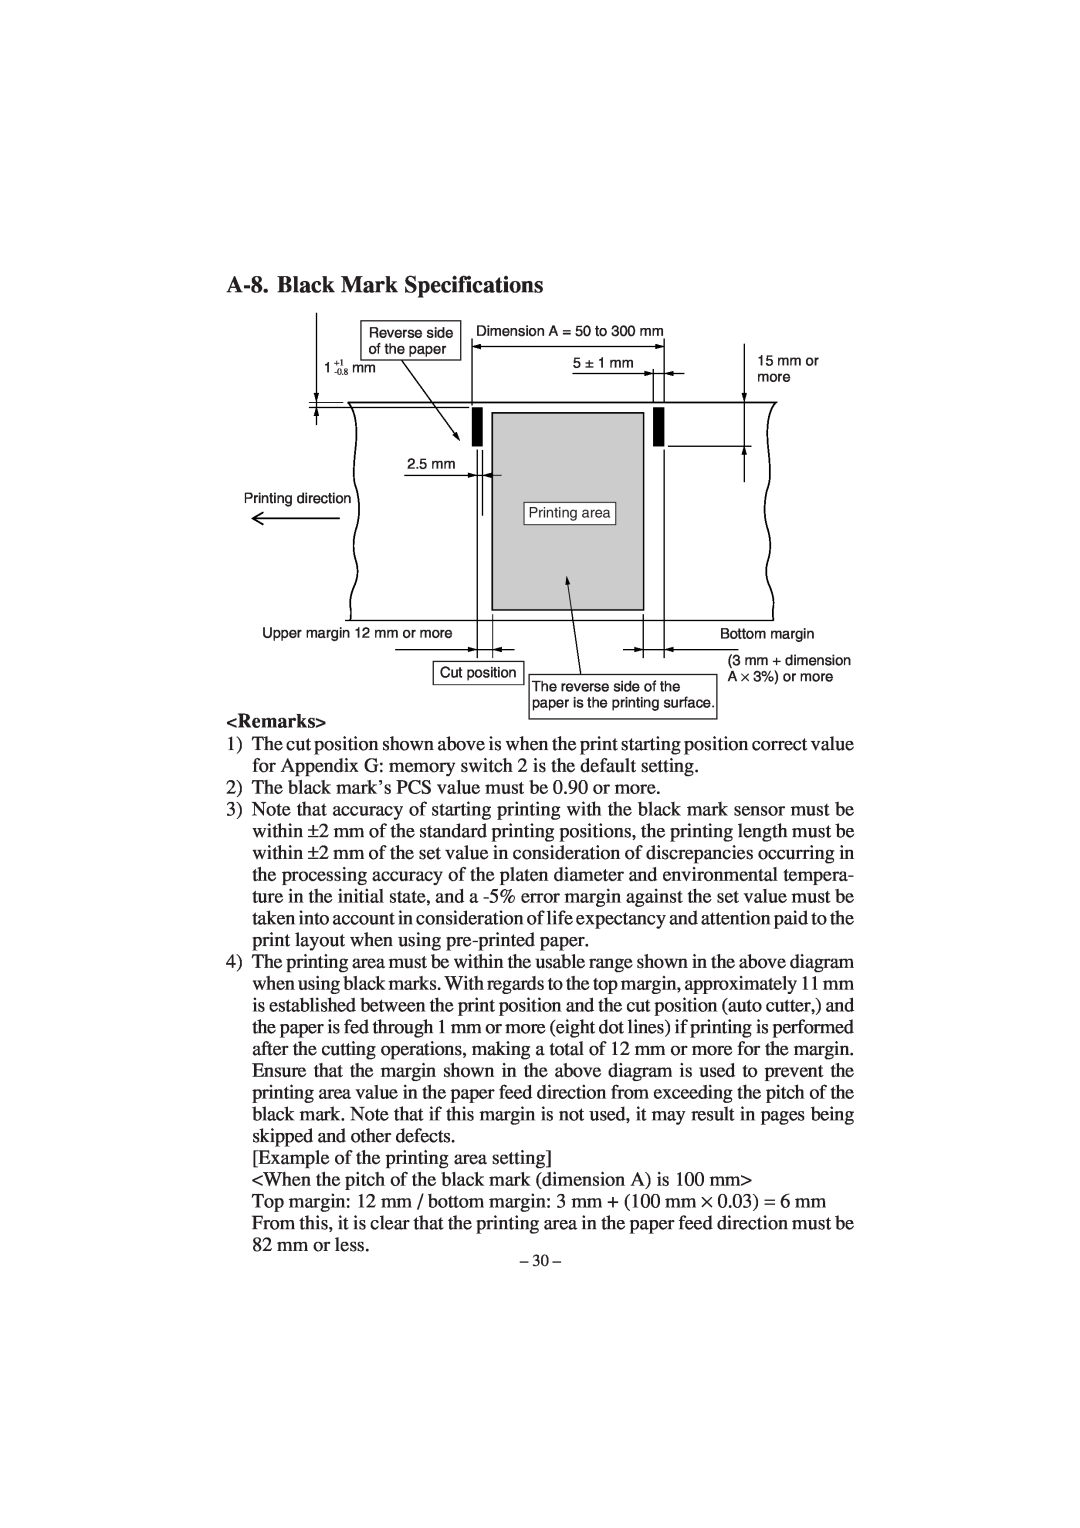 Star Micronics TSP1000 user manual A-8. Black Mark Specifications, Remarks 